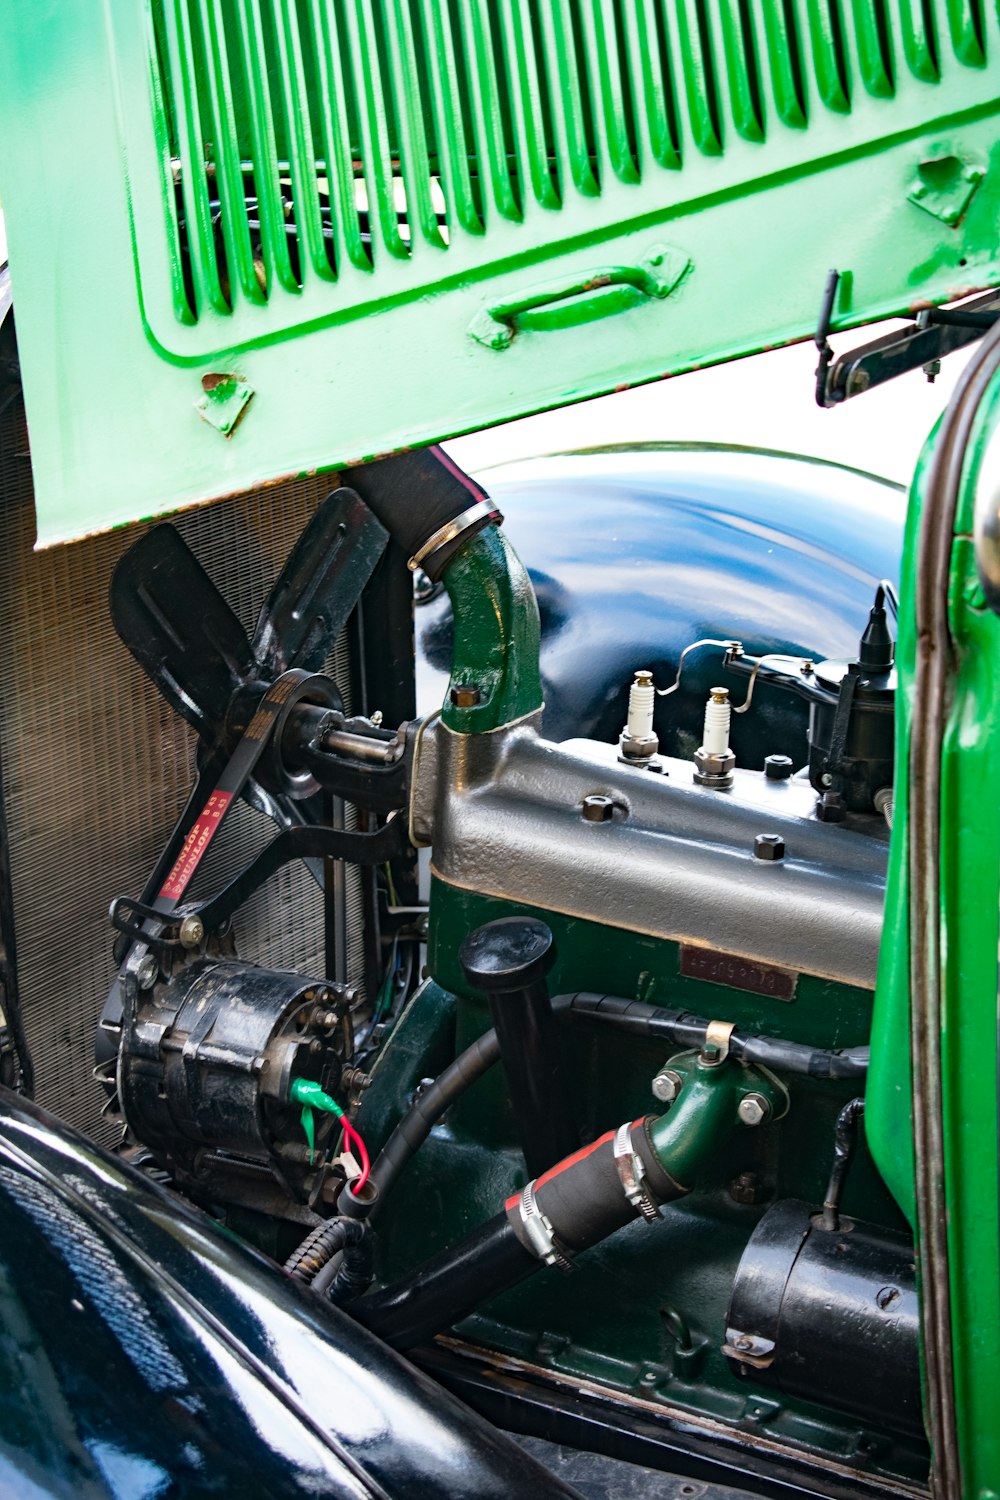 a close up of the engine of a green truck